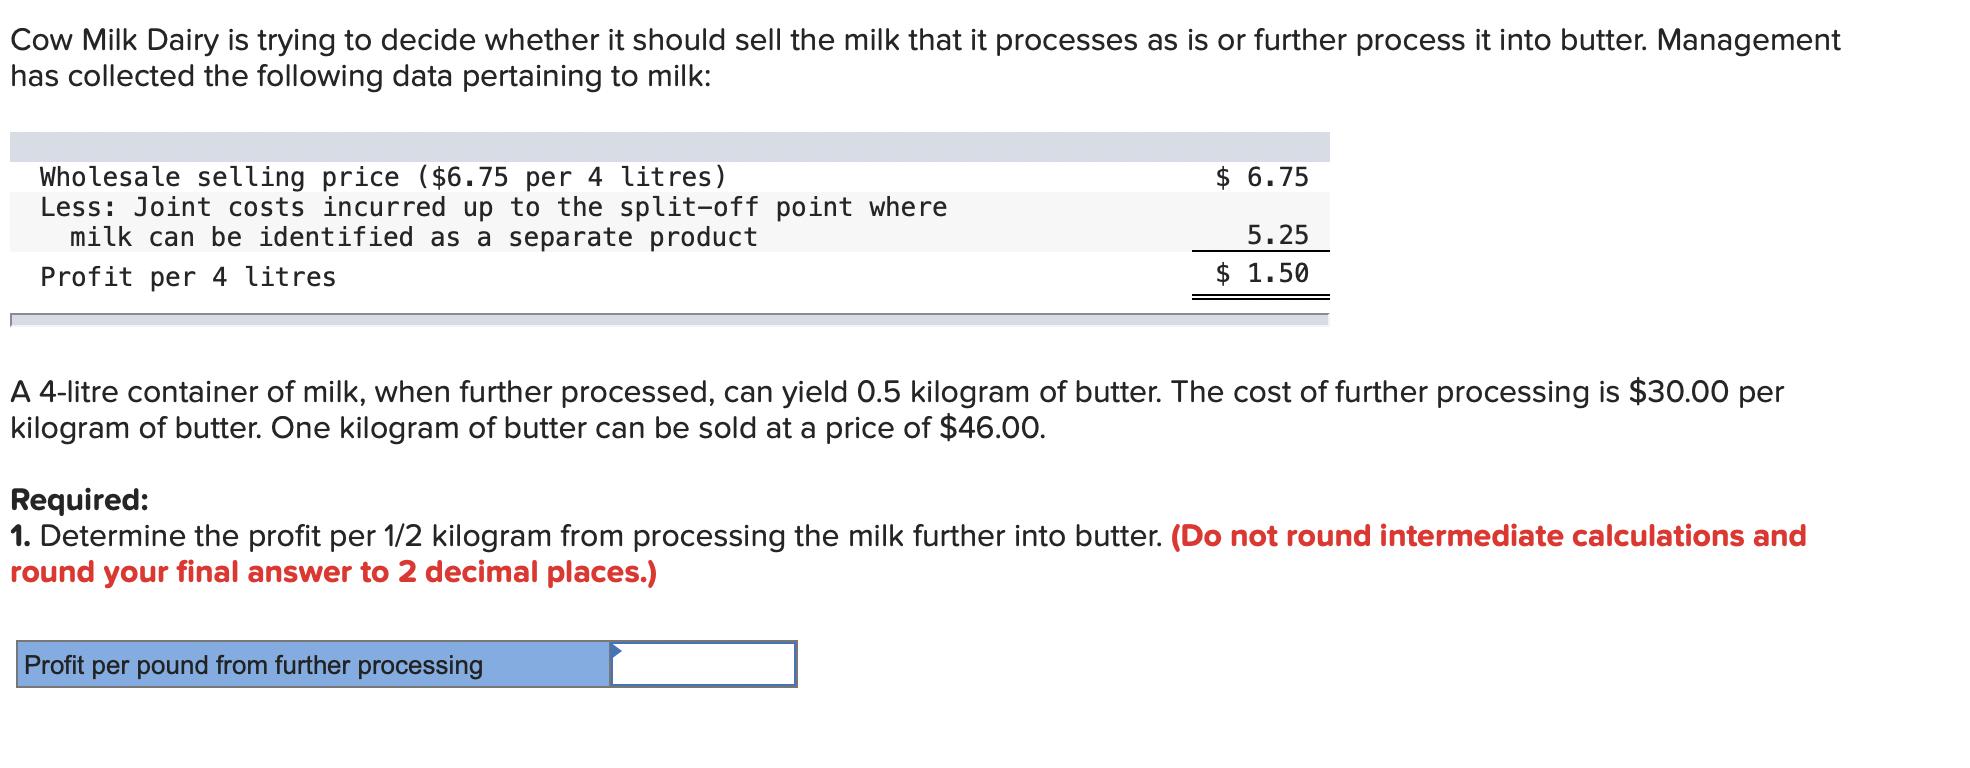 Cow Milk Dairy is trying to decide whether it should sell the milk that it processes as is or further process